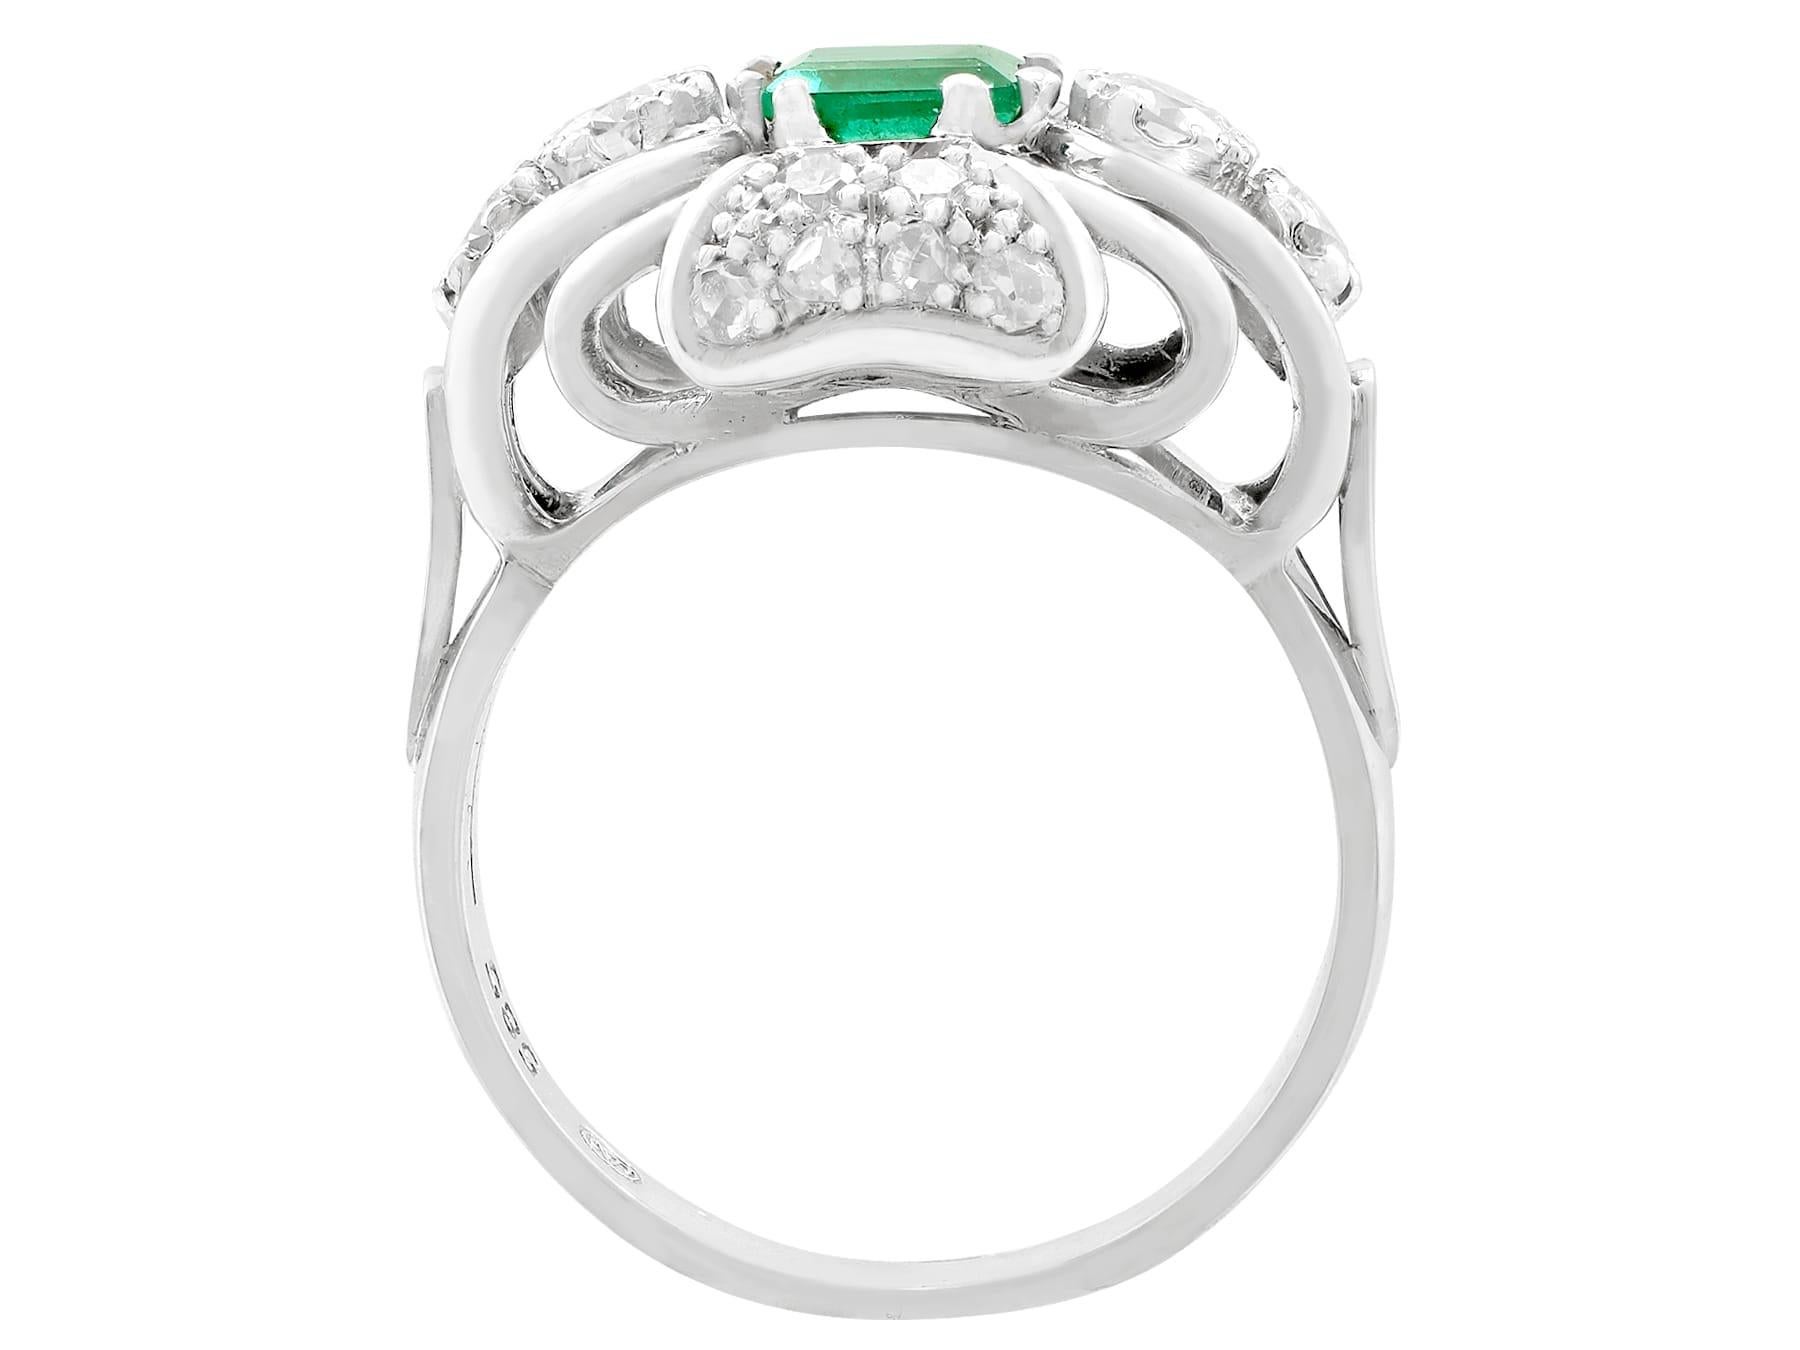 1950s Emerald and Diamond White Gold Cocktail Ring In Excellent Condition For Sale In Jesmond, Newcastle Upon Tyne